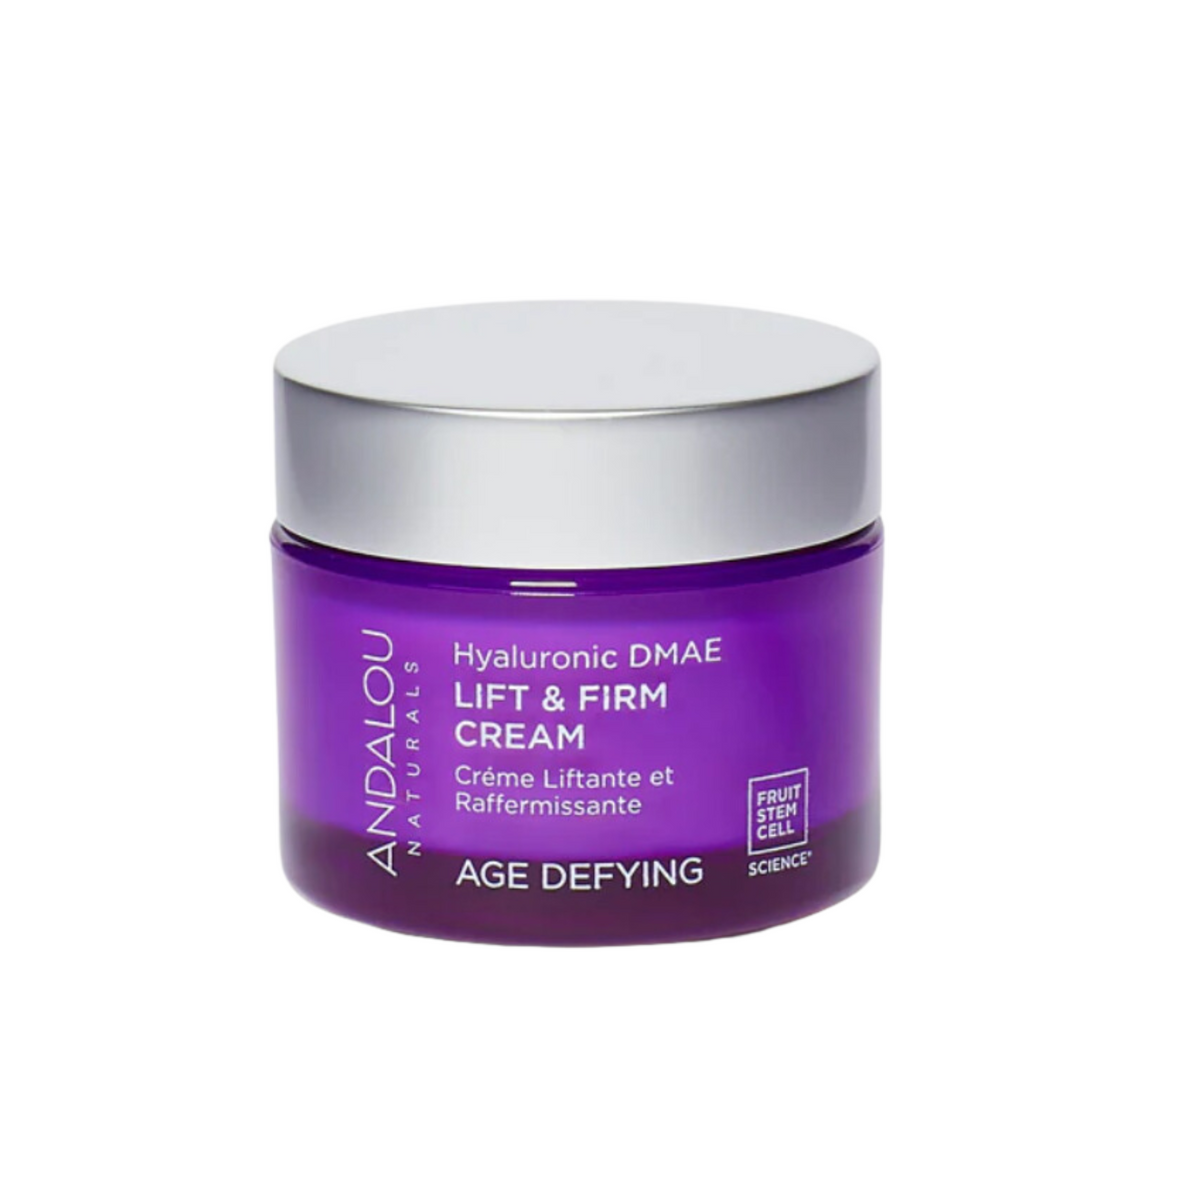 Age Defying Hyaluronic DMAE Lift & Firm Cream - Andalou Naturals US